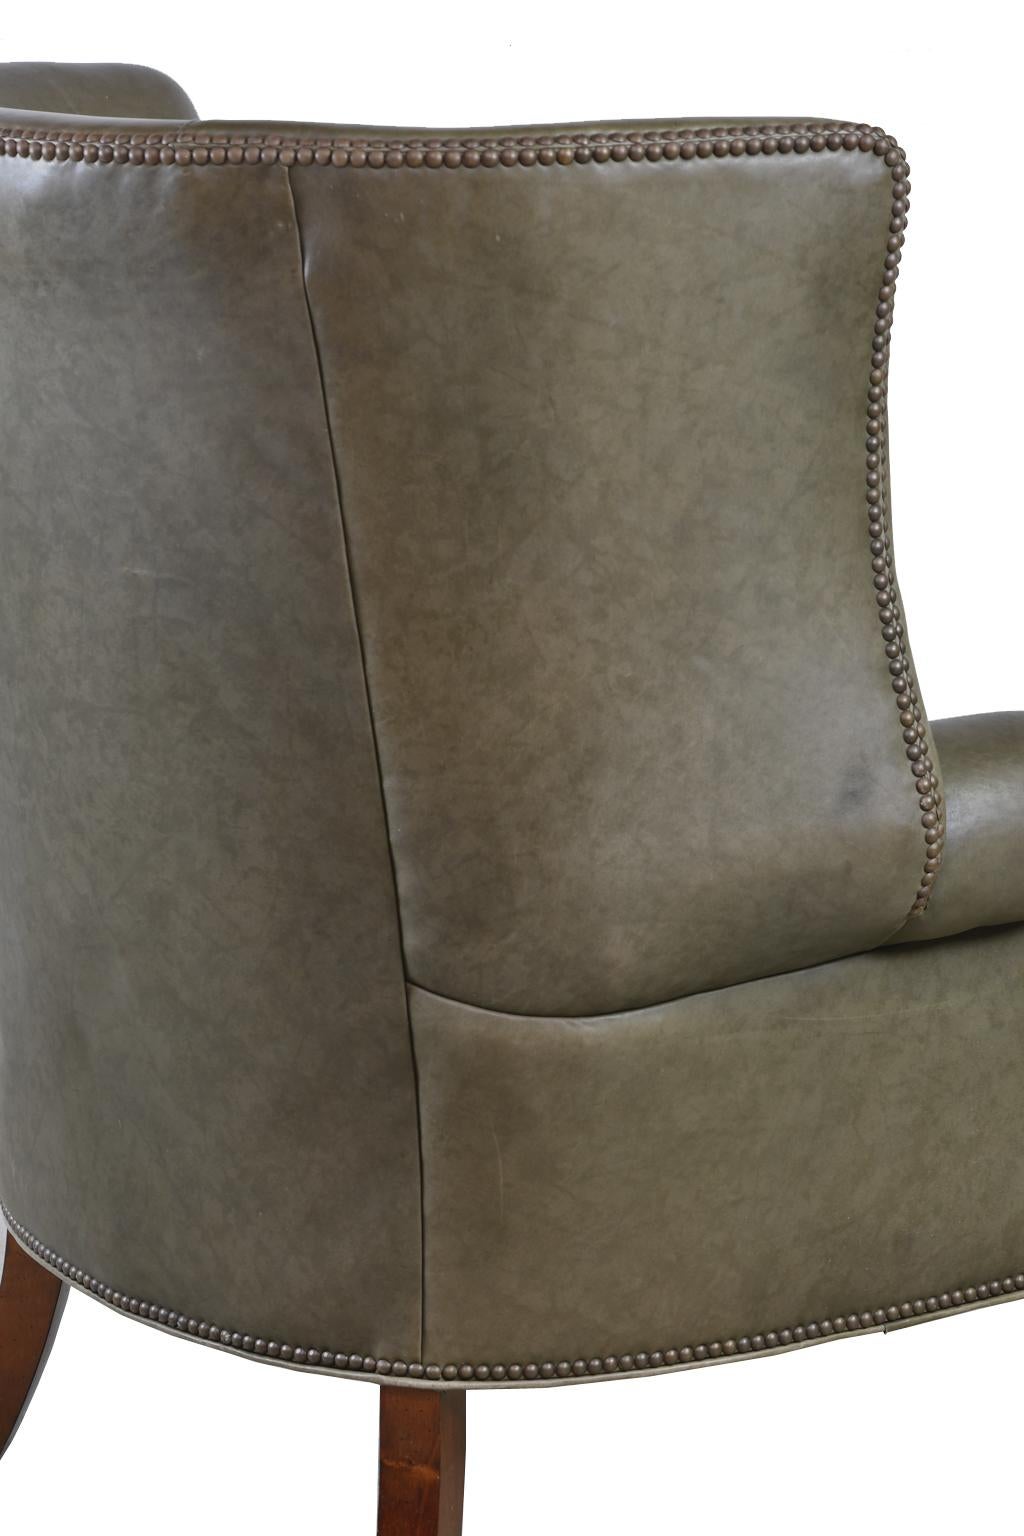 Carved Large Vintage Wingback Armchair with Sage-Green Leather Upholstery